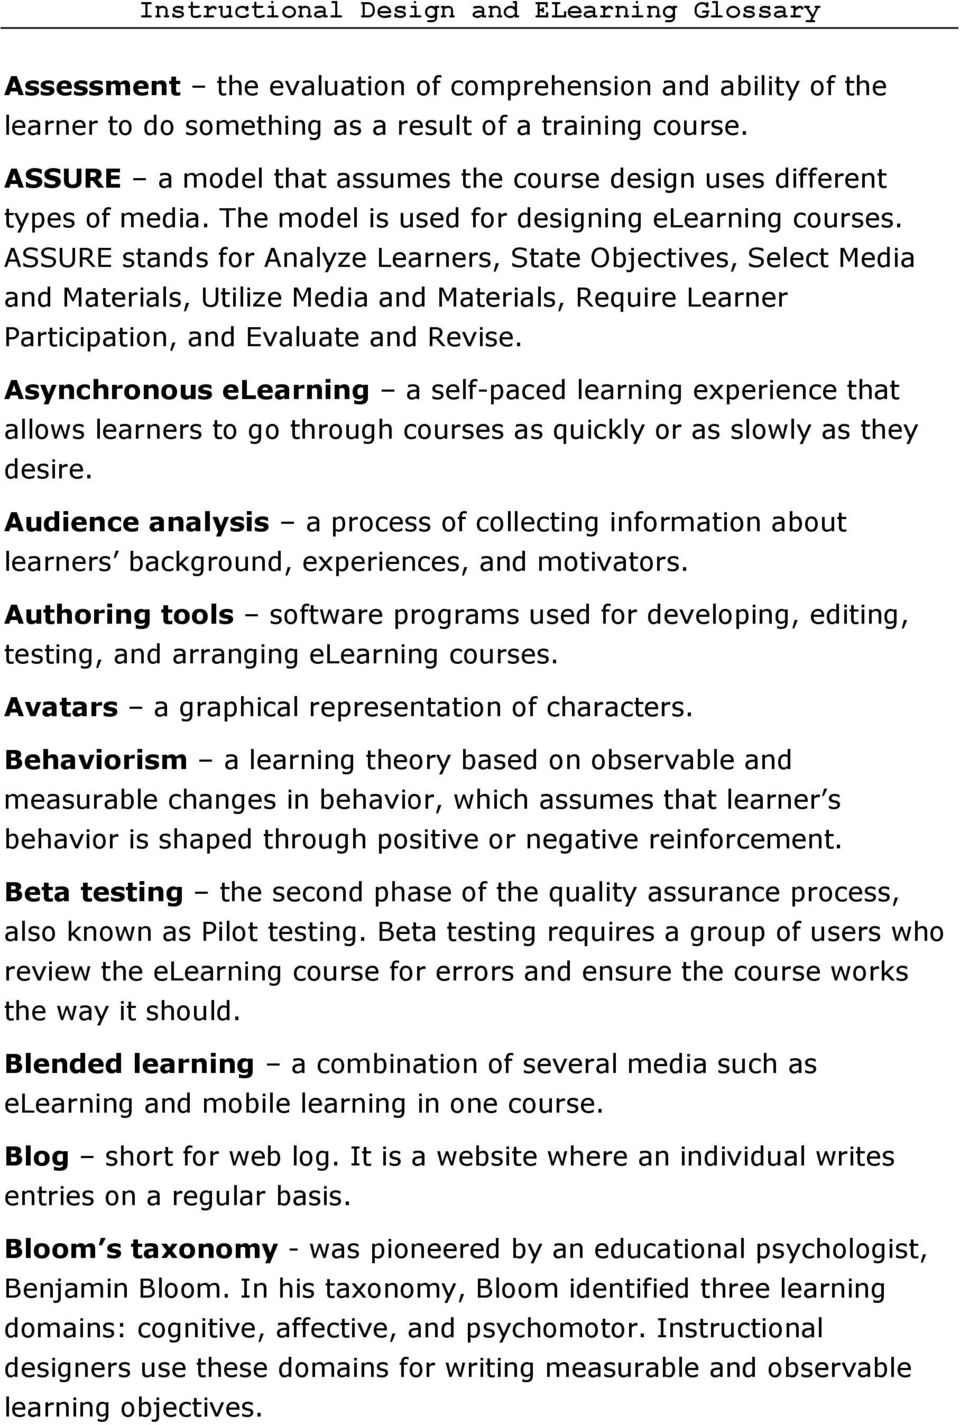 ASSURE stands for Analyze Learners, State Objectives, Select Media and Materials, Utilize Media and Materials, Require Learner Participation, and Evaluate and Revise.